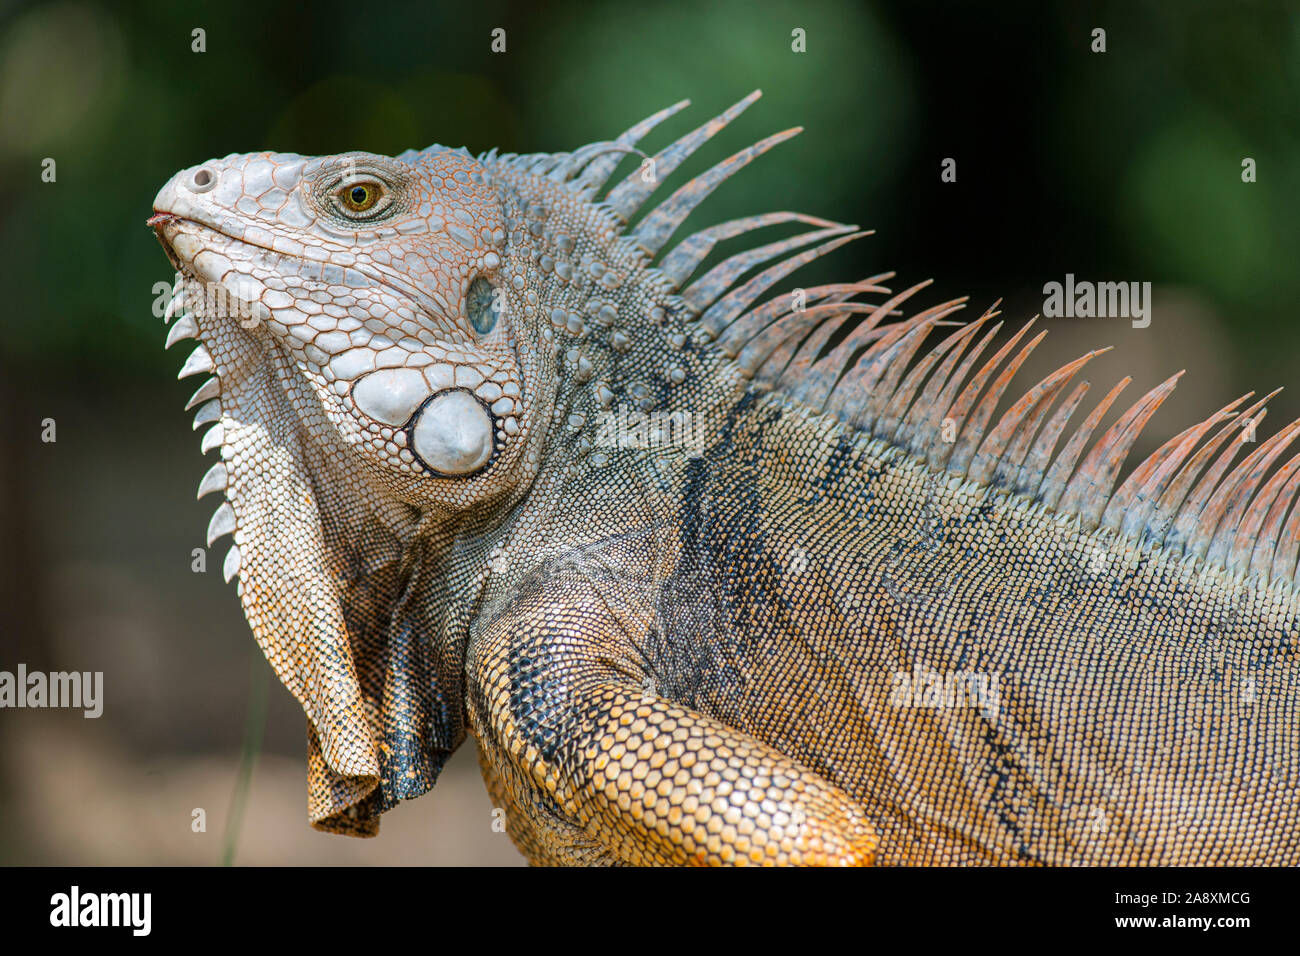 Iguana in the botanical gardens of Medellin, Colombia. Stock Photo